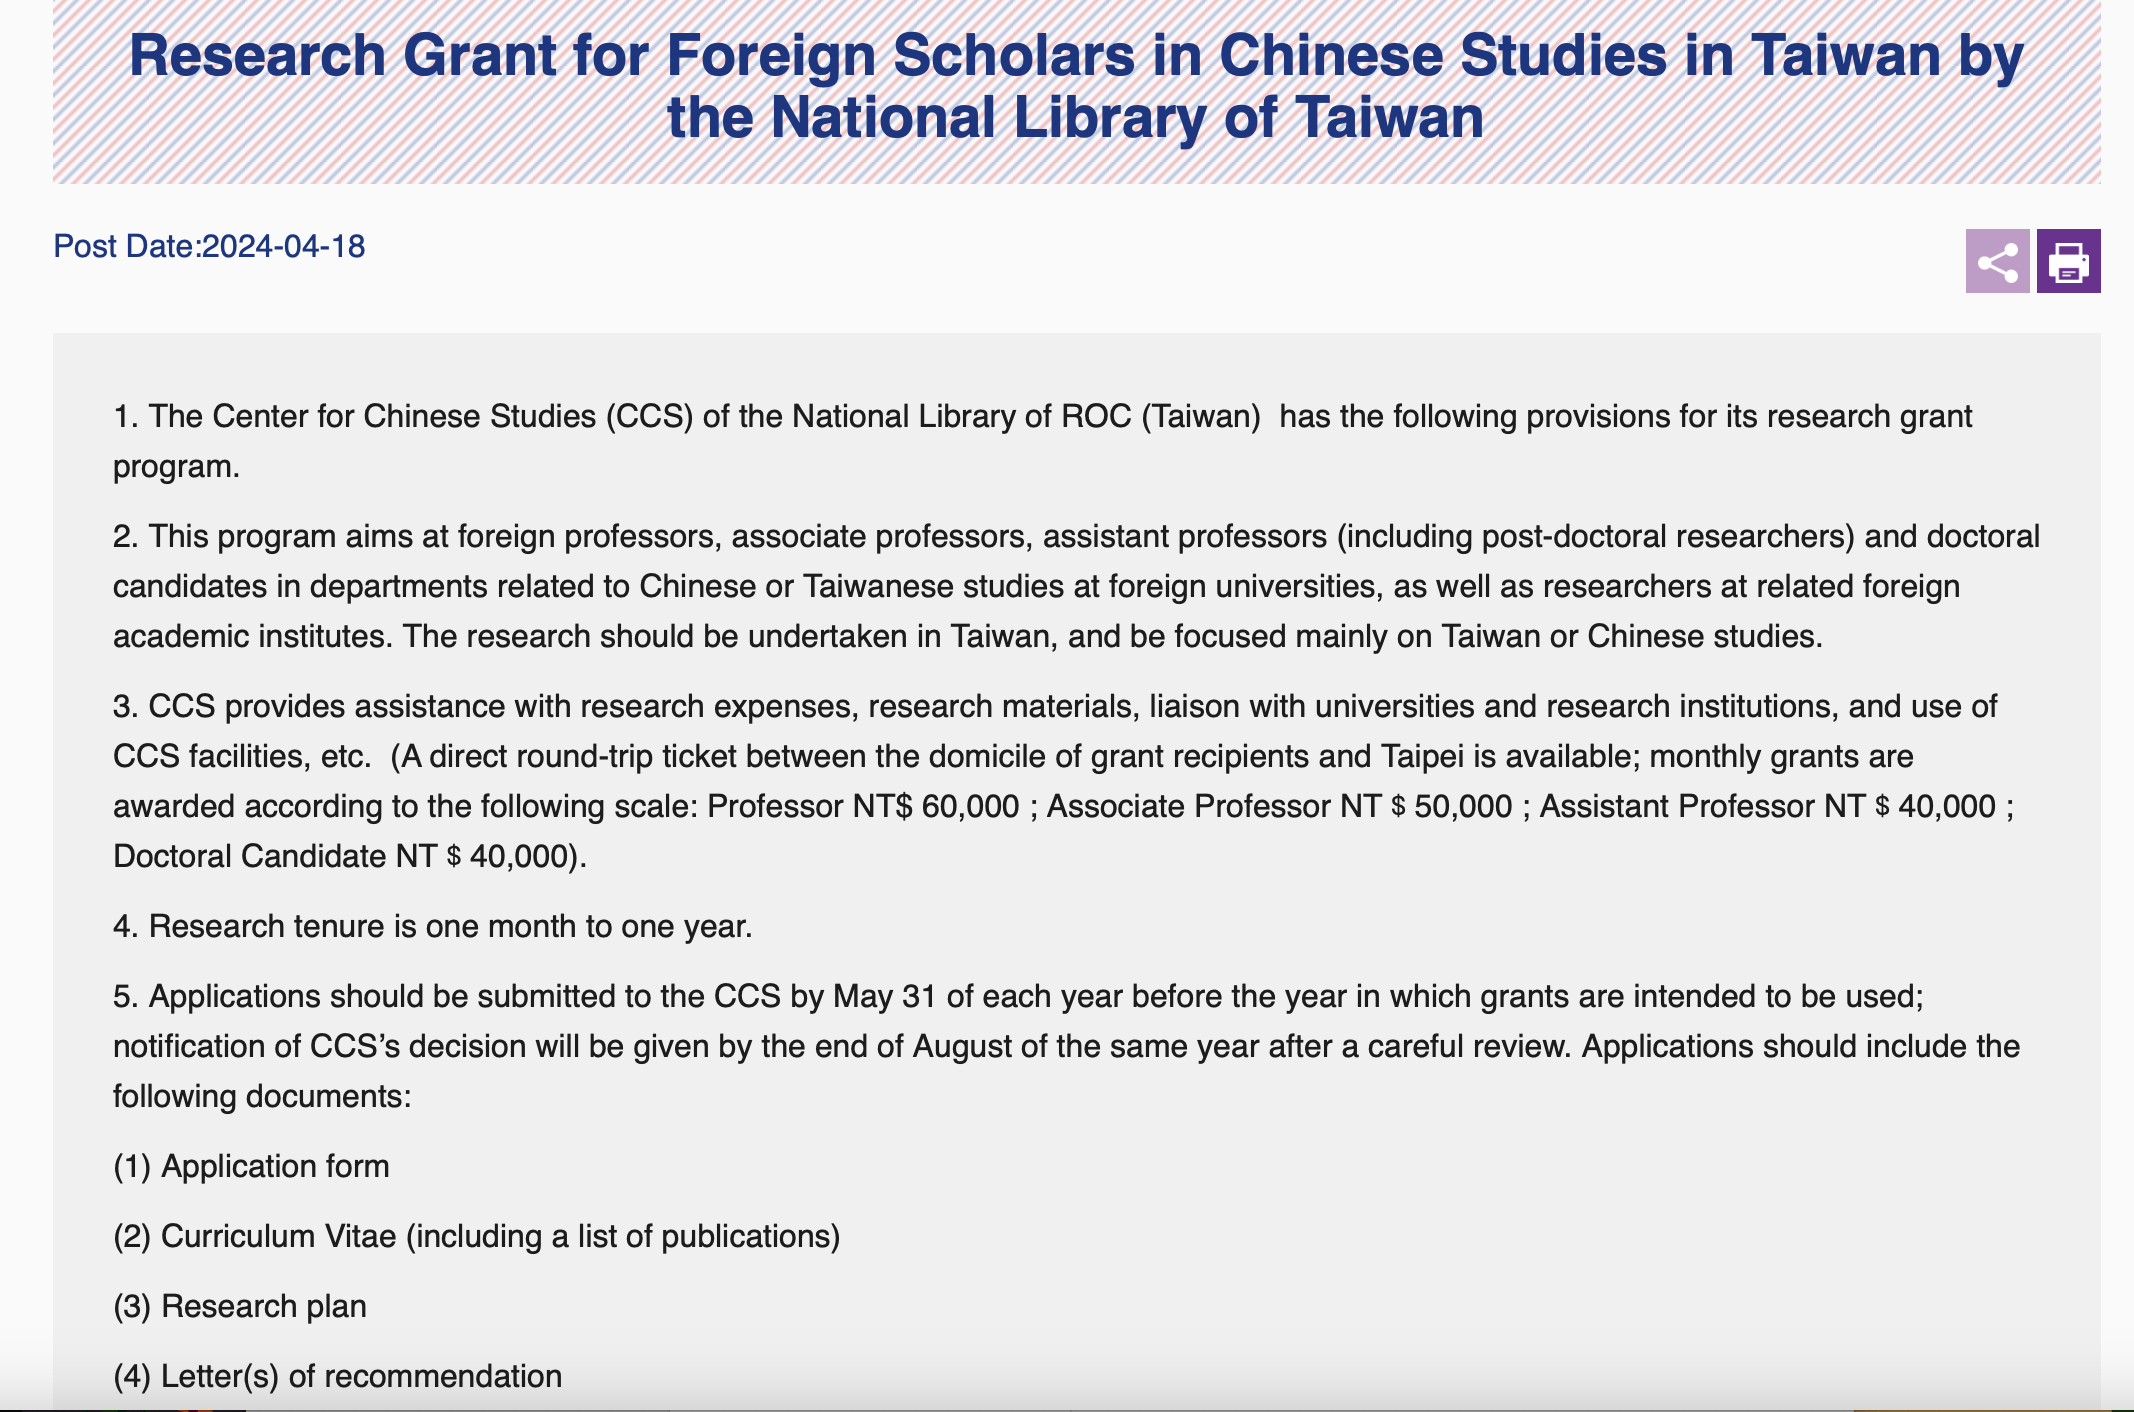 【2024.4.30】Research Grant for Foreign Scholars in Chinese Studies in Taiwan by the National Library of Taiwan